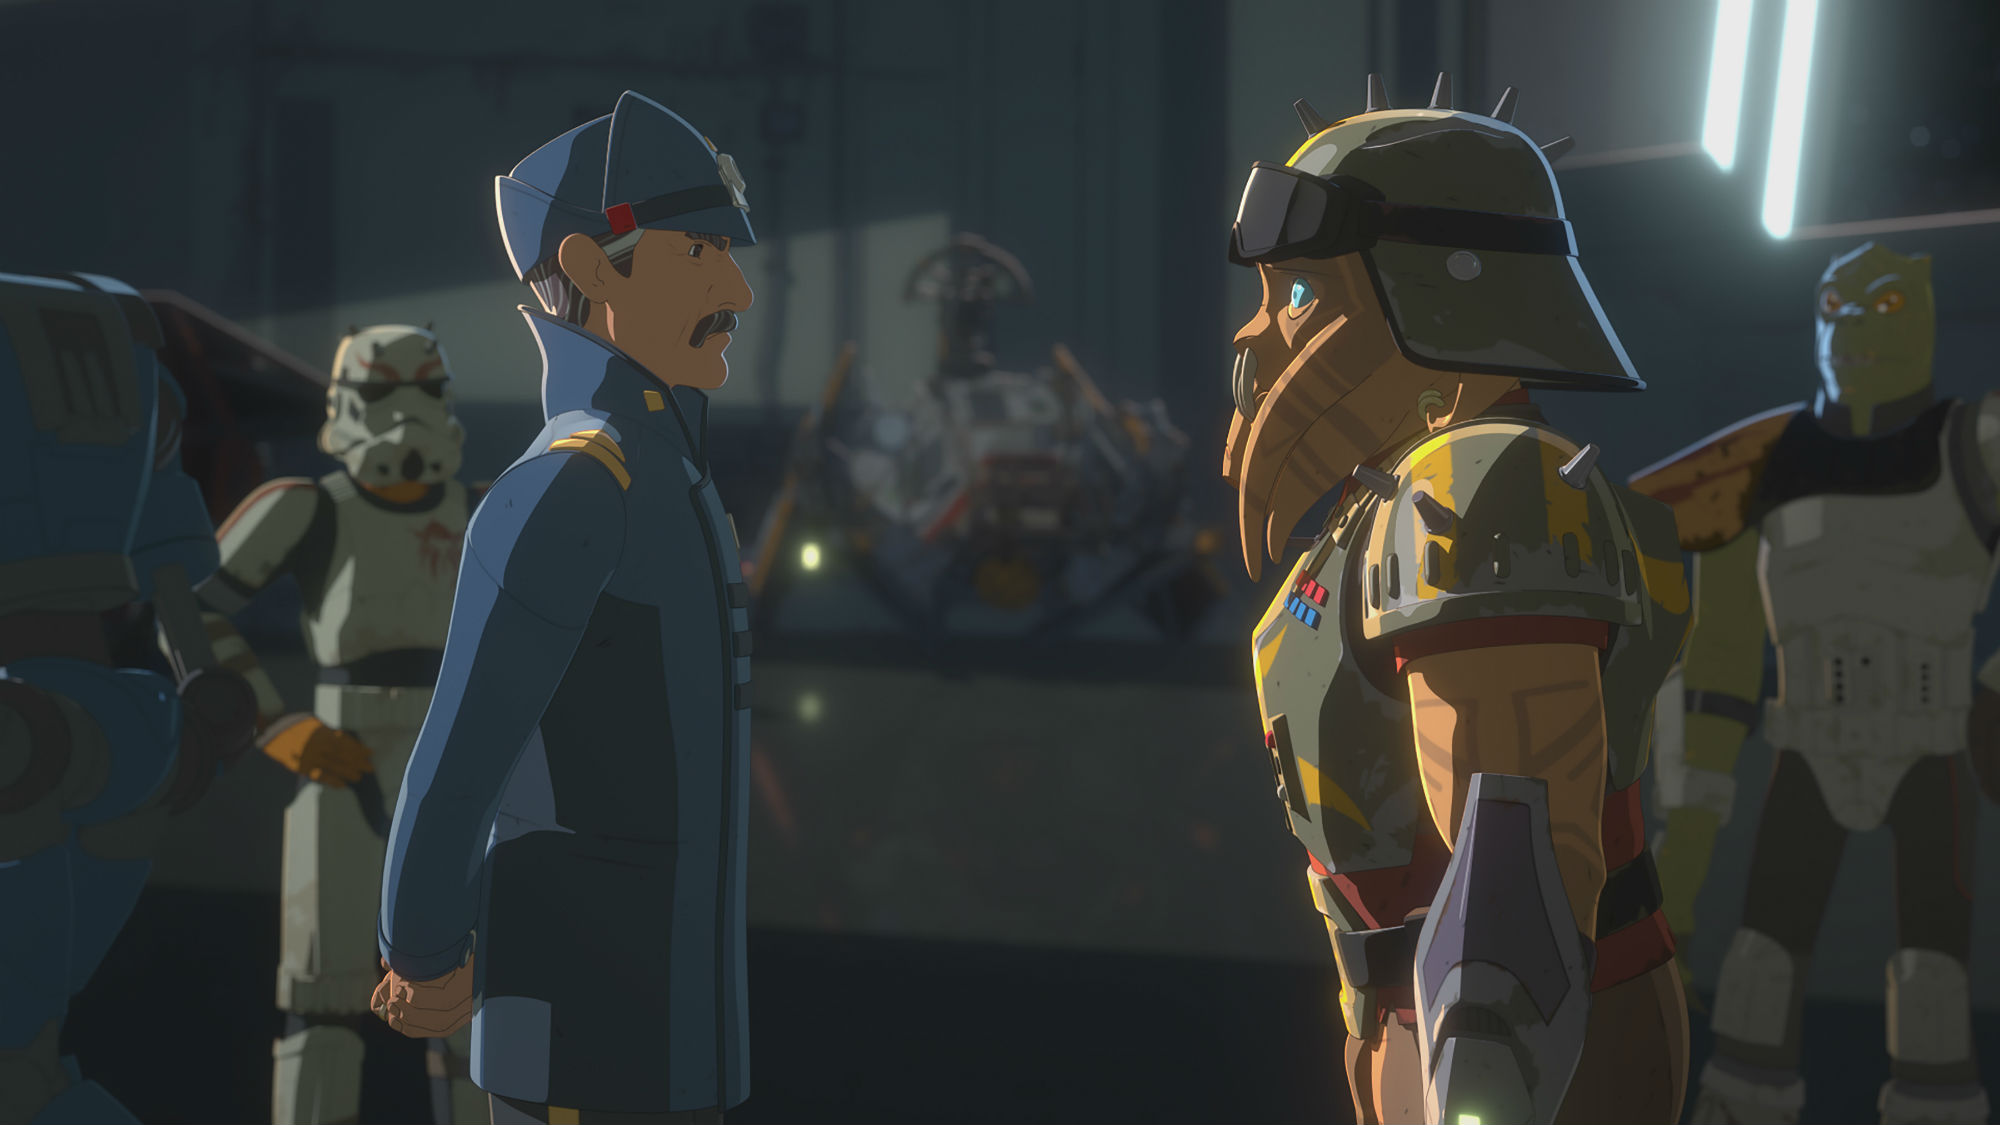 Star Wars Resistance Season 2 Episode 14 Review: The ...